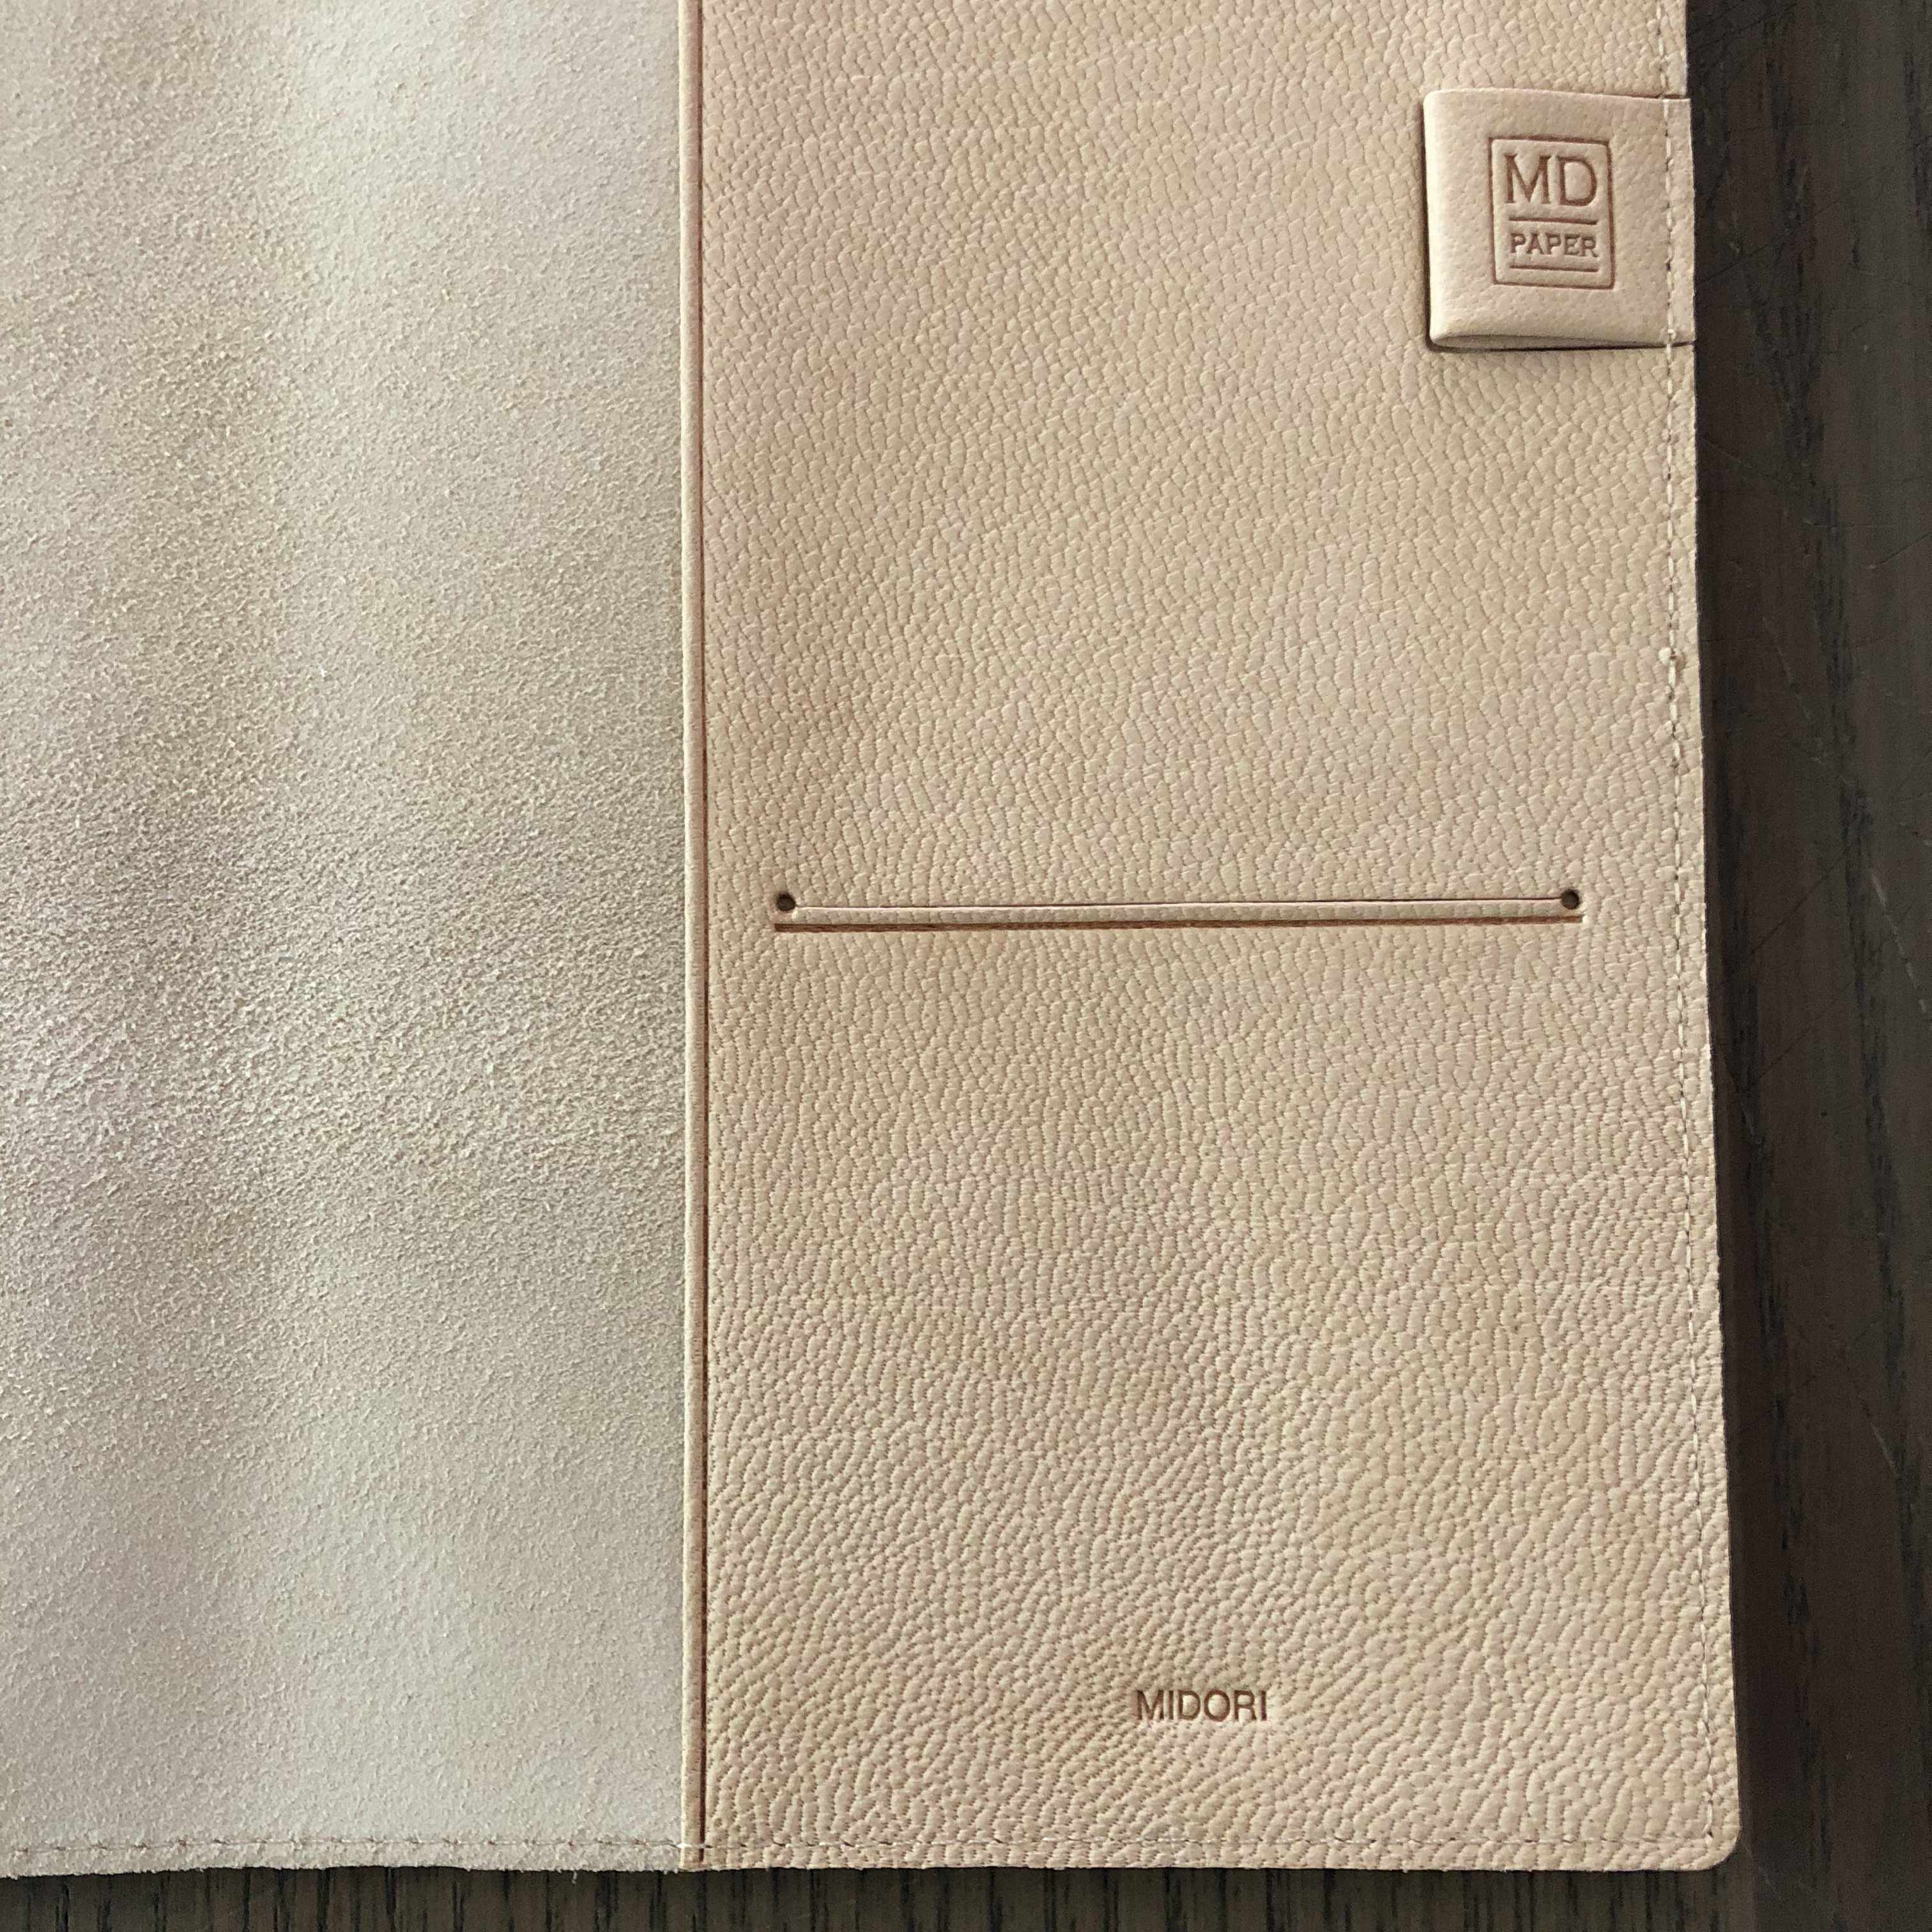 35 Days with the Midori Goat Leather Cover 